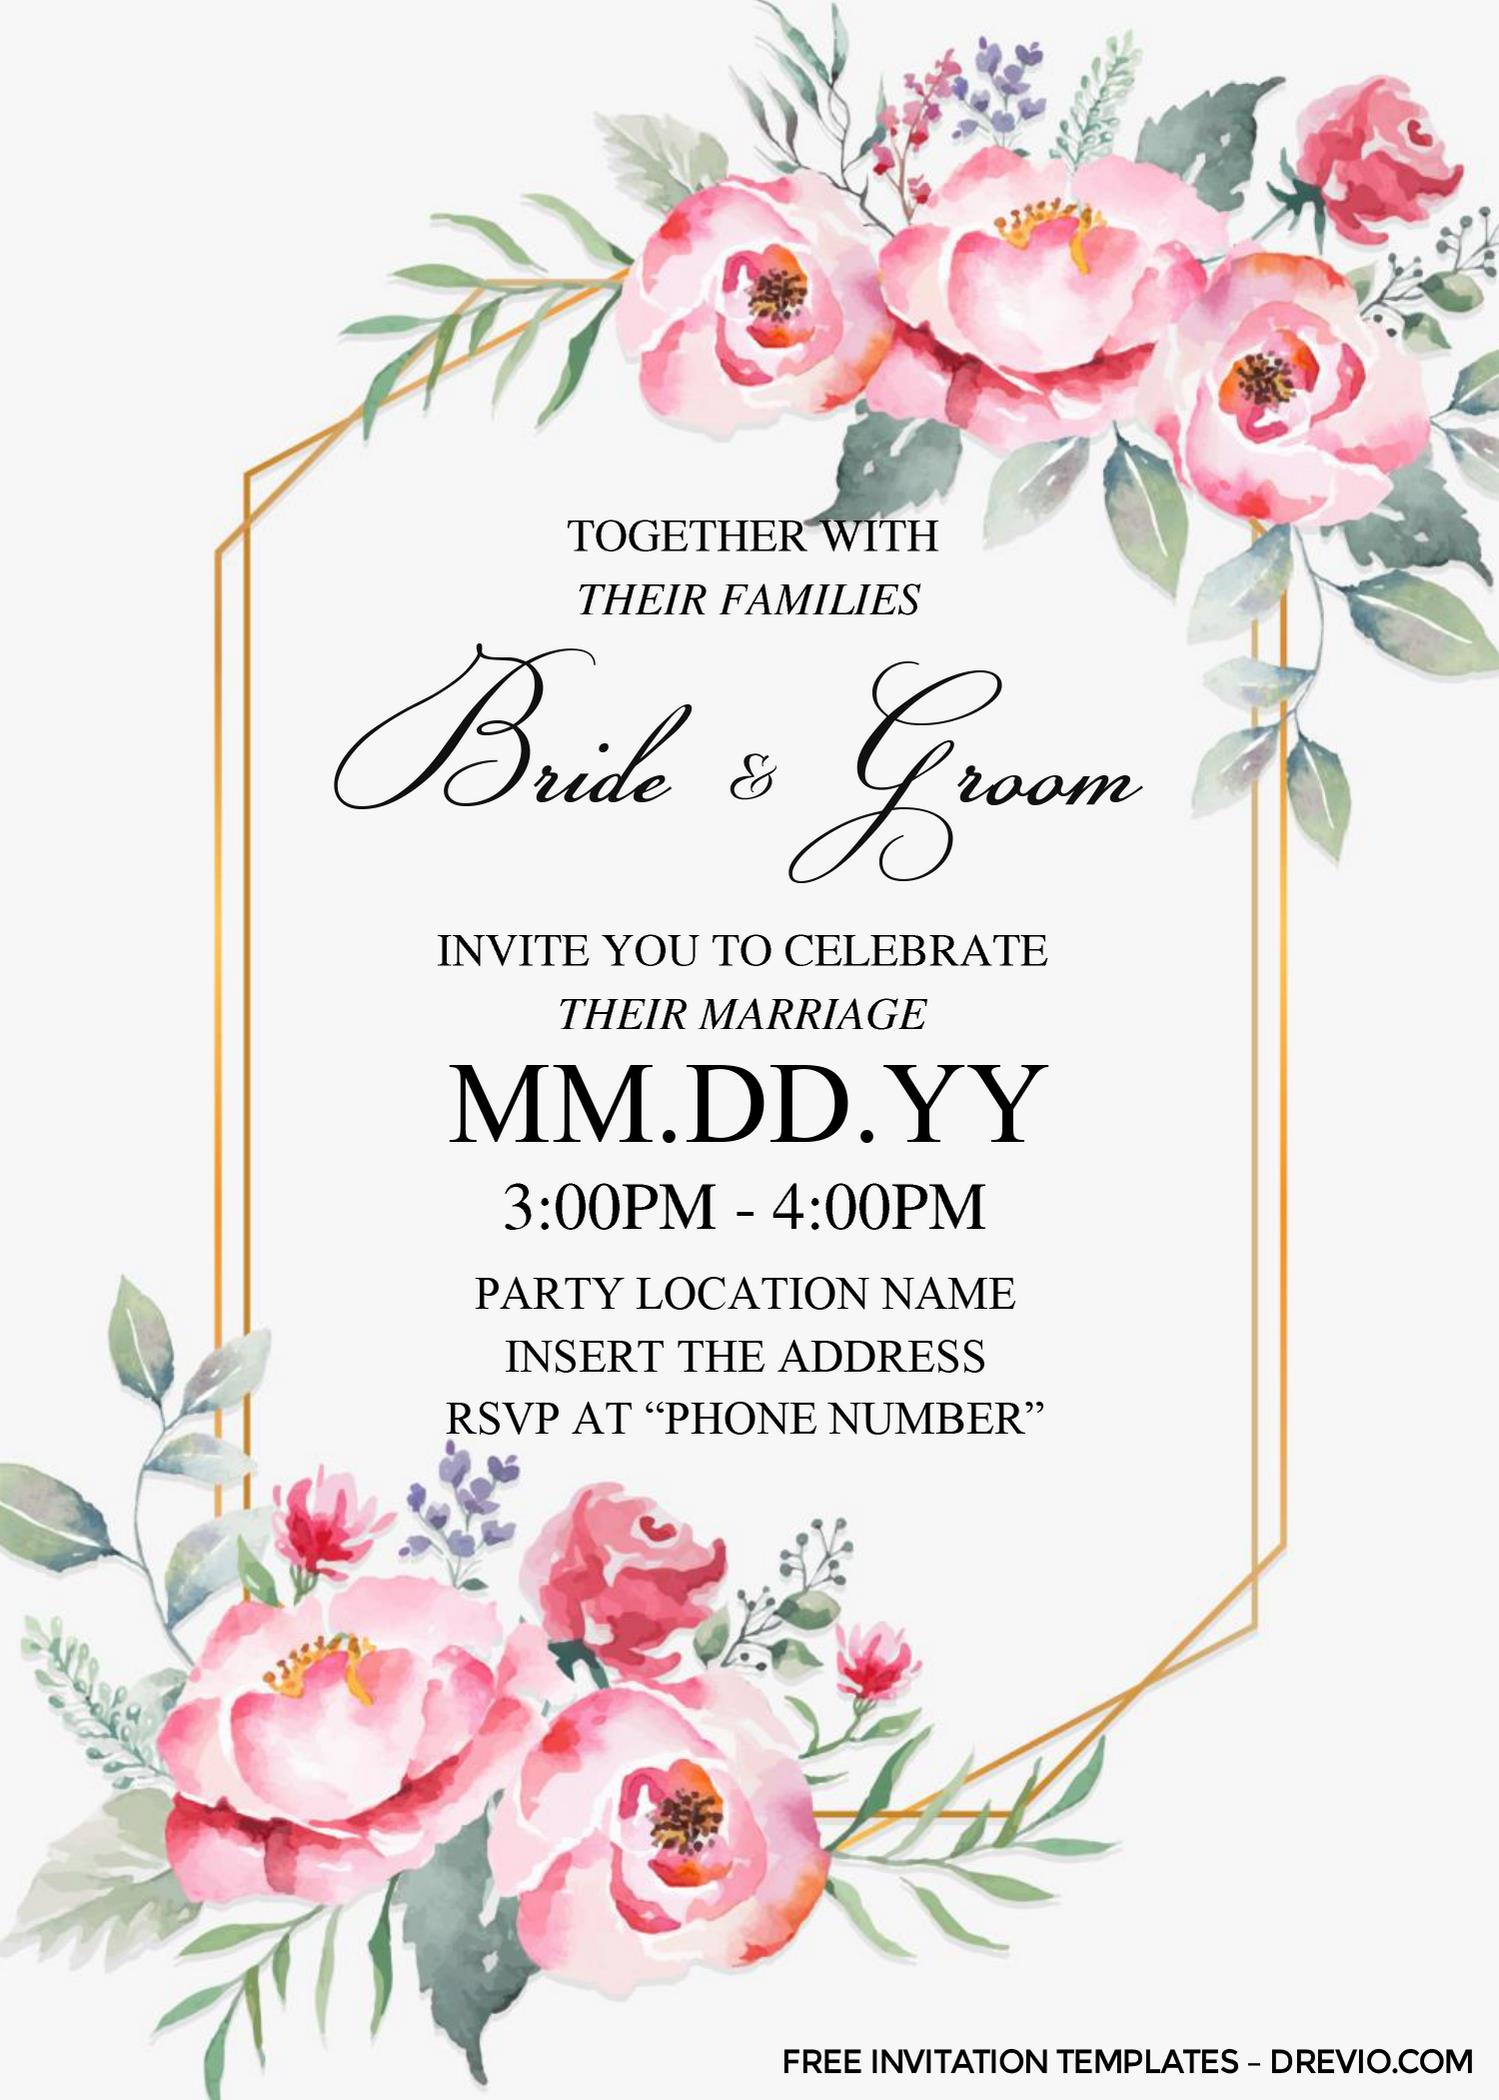 Free Dusty Rose Wedding Invitation Template For Word | Download ...